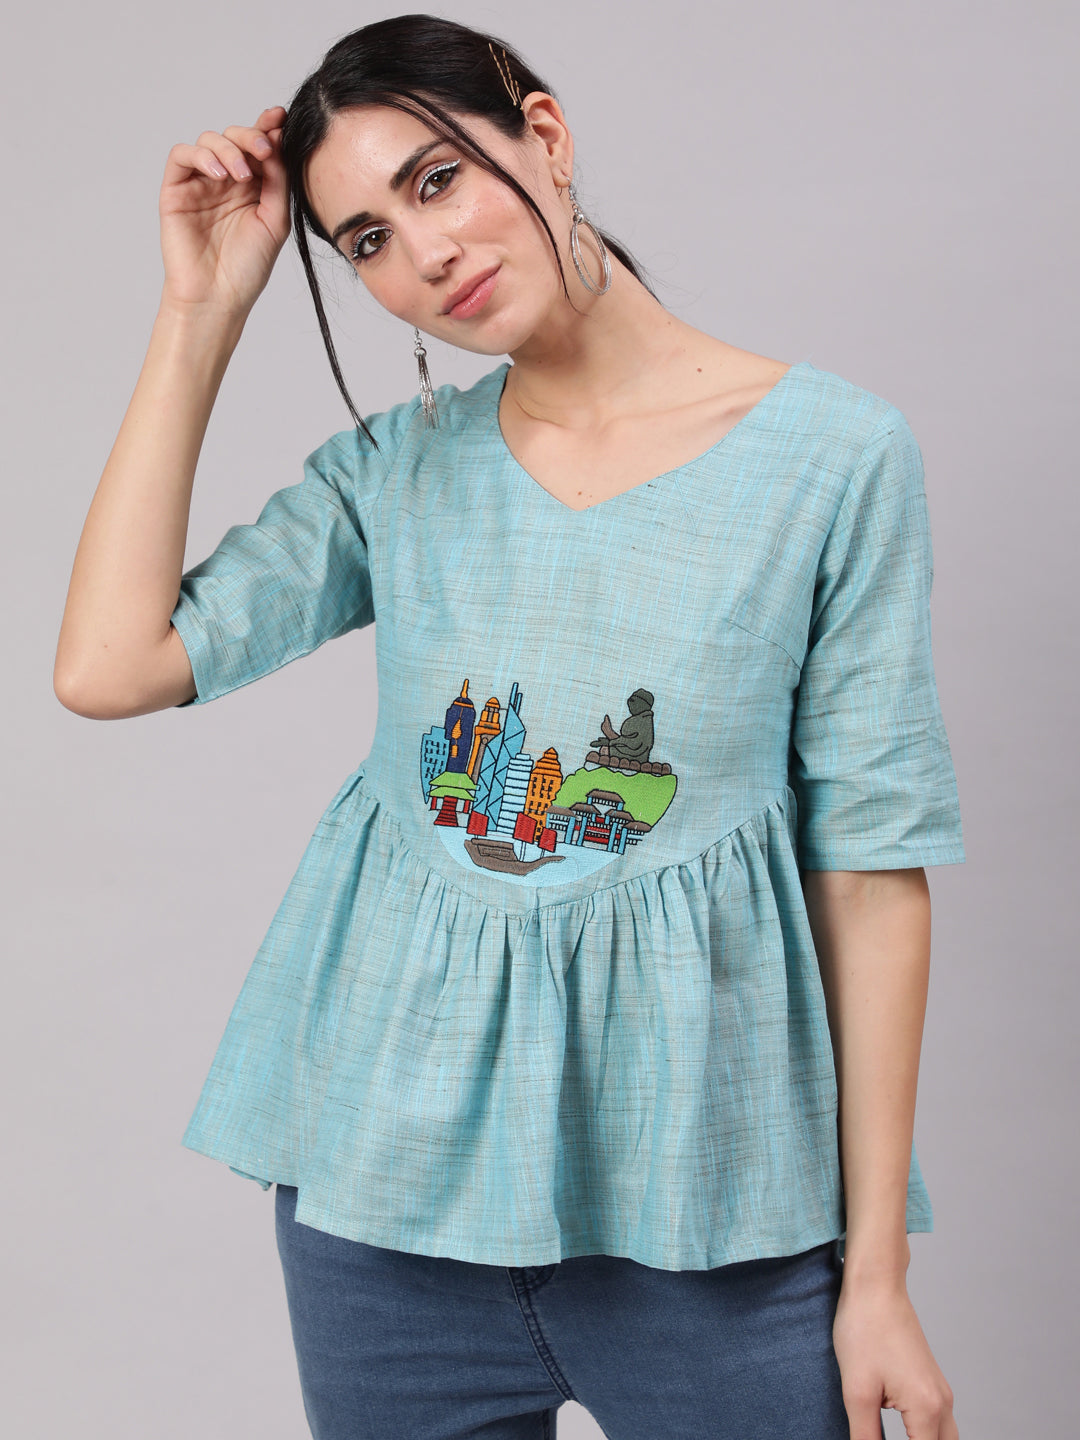 Blue Singapore Embroidered Tunic